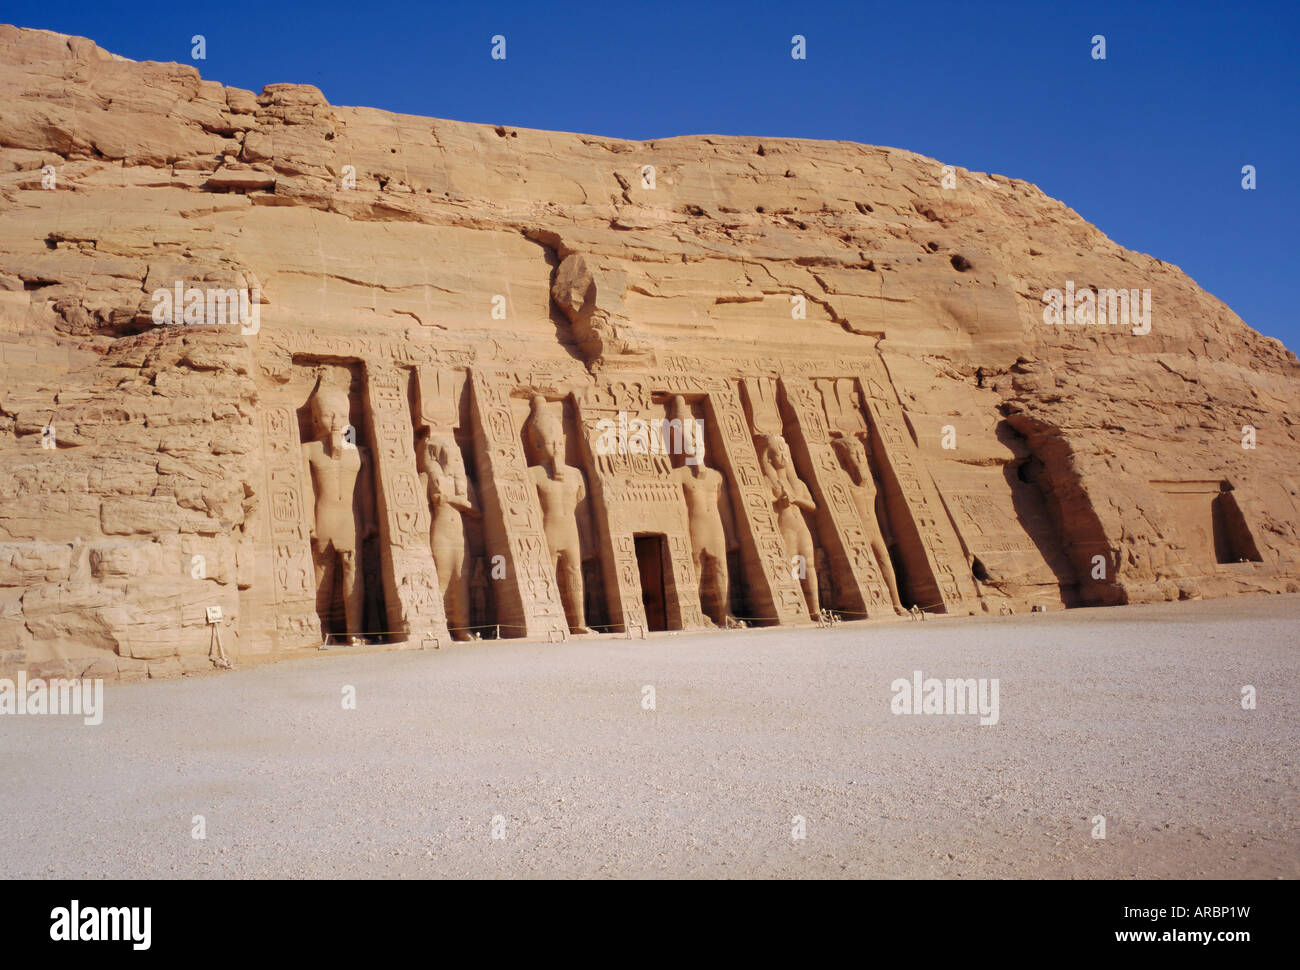 Temple of Hathor in honour of Nefretare, was moved when Aswan High Dam was built, Abu Simbel, Egypt, North Africa Stock Photo